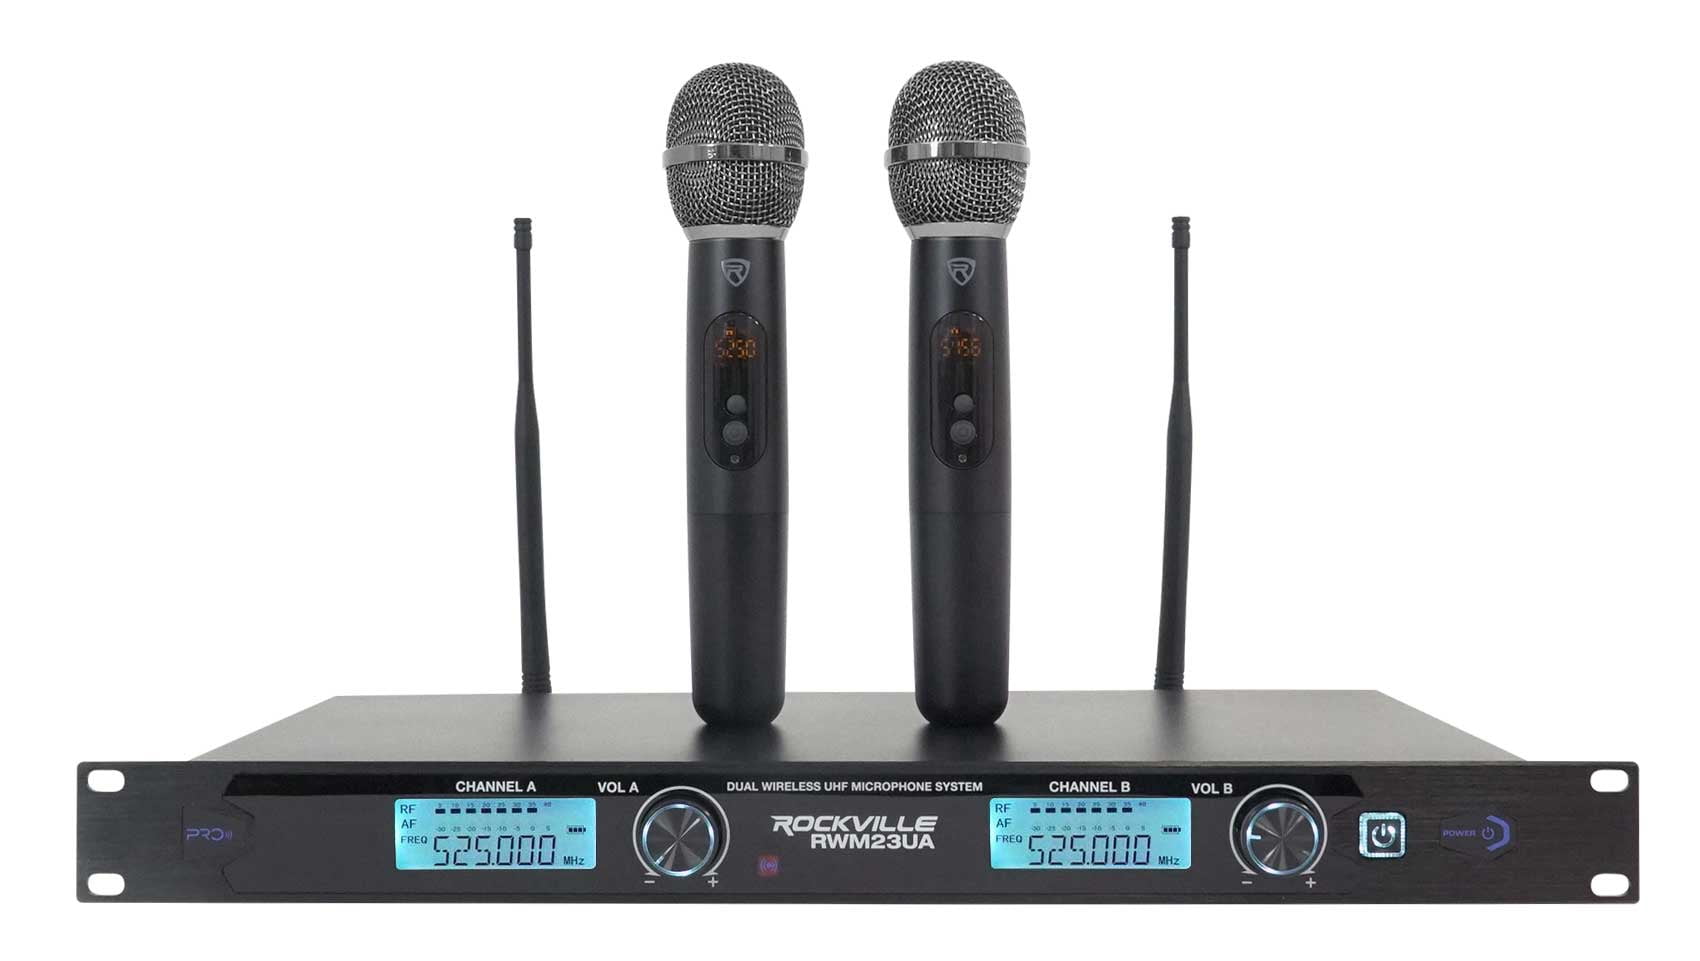 2 Handheld Dynamic Transmitter Mics Boytone BT-46UM UHF Digital Channel Wireless Microphone System Church Aluminum Carrying Cases for Party Dual Fixed Frequency Wireless Mic Receiver 110/220V